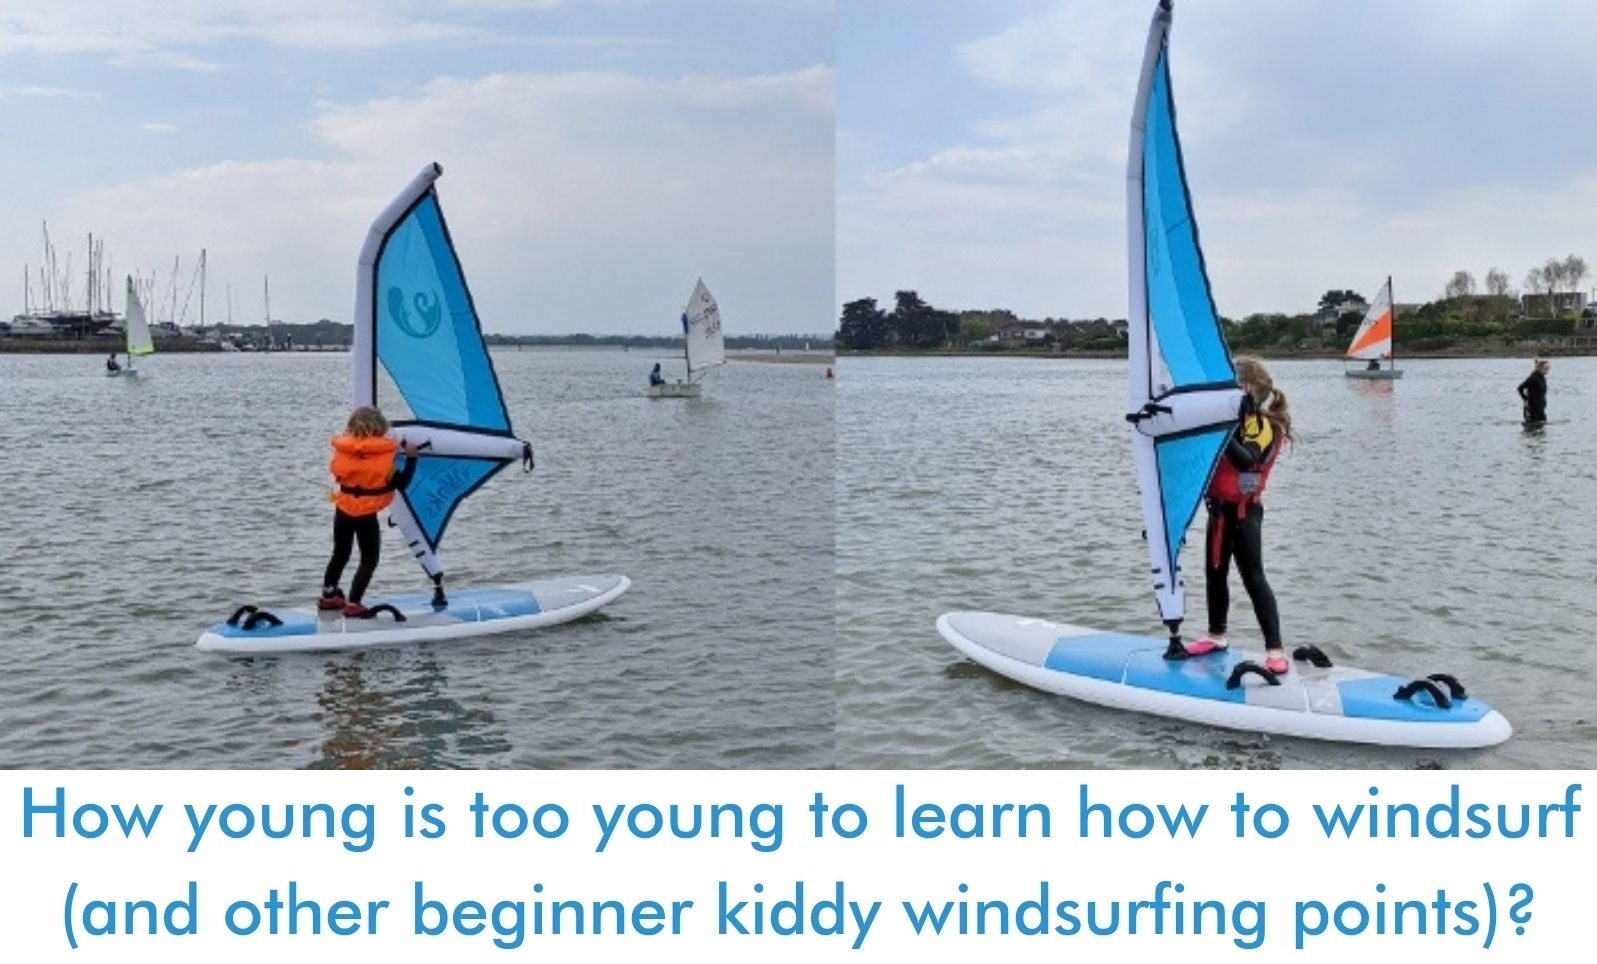 You are currently viewing How young is too young to learn how to windsurf (and other beginner kiddy windsurfing points)?